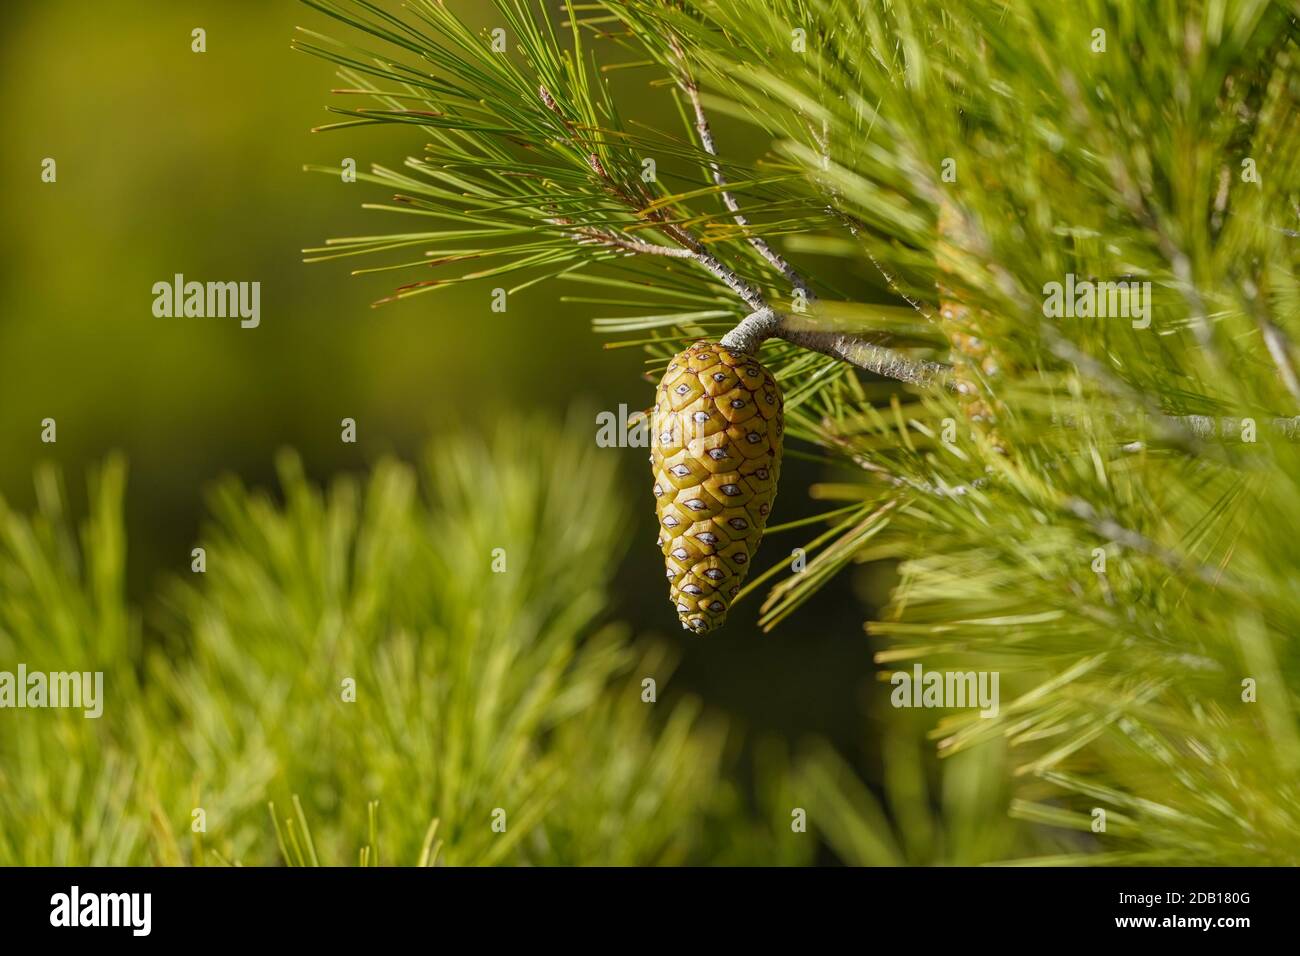 Aleppo pine (Pinus halepensis) branch with cones. Spain. Stock Photo